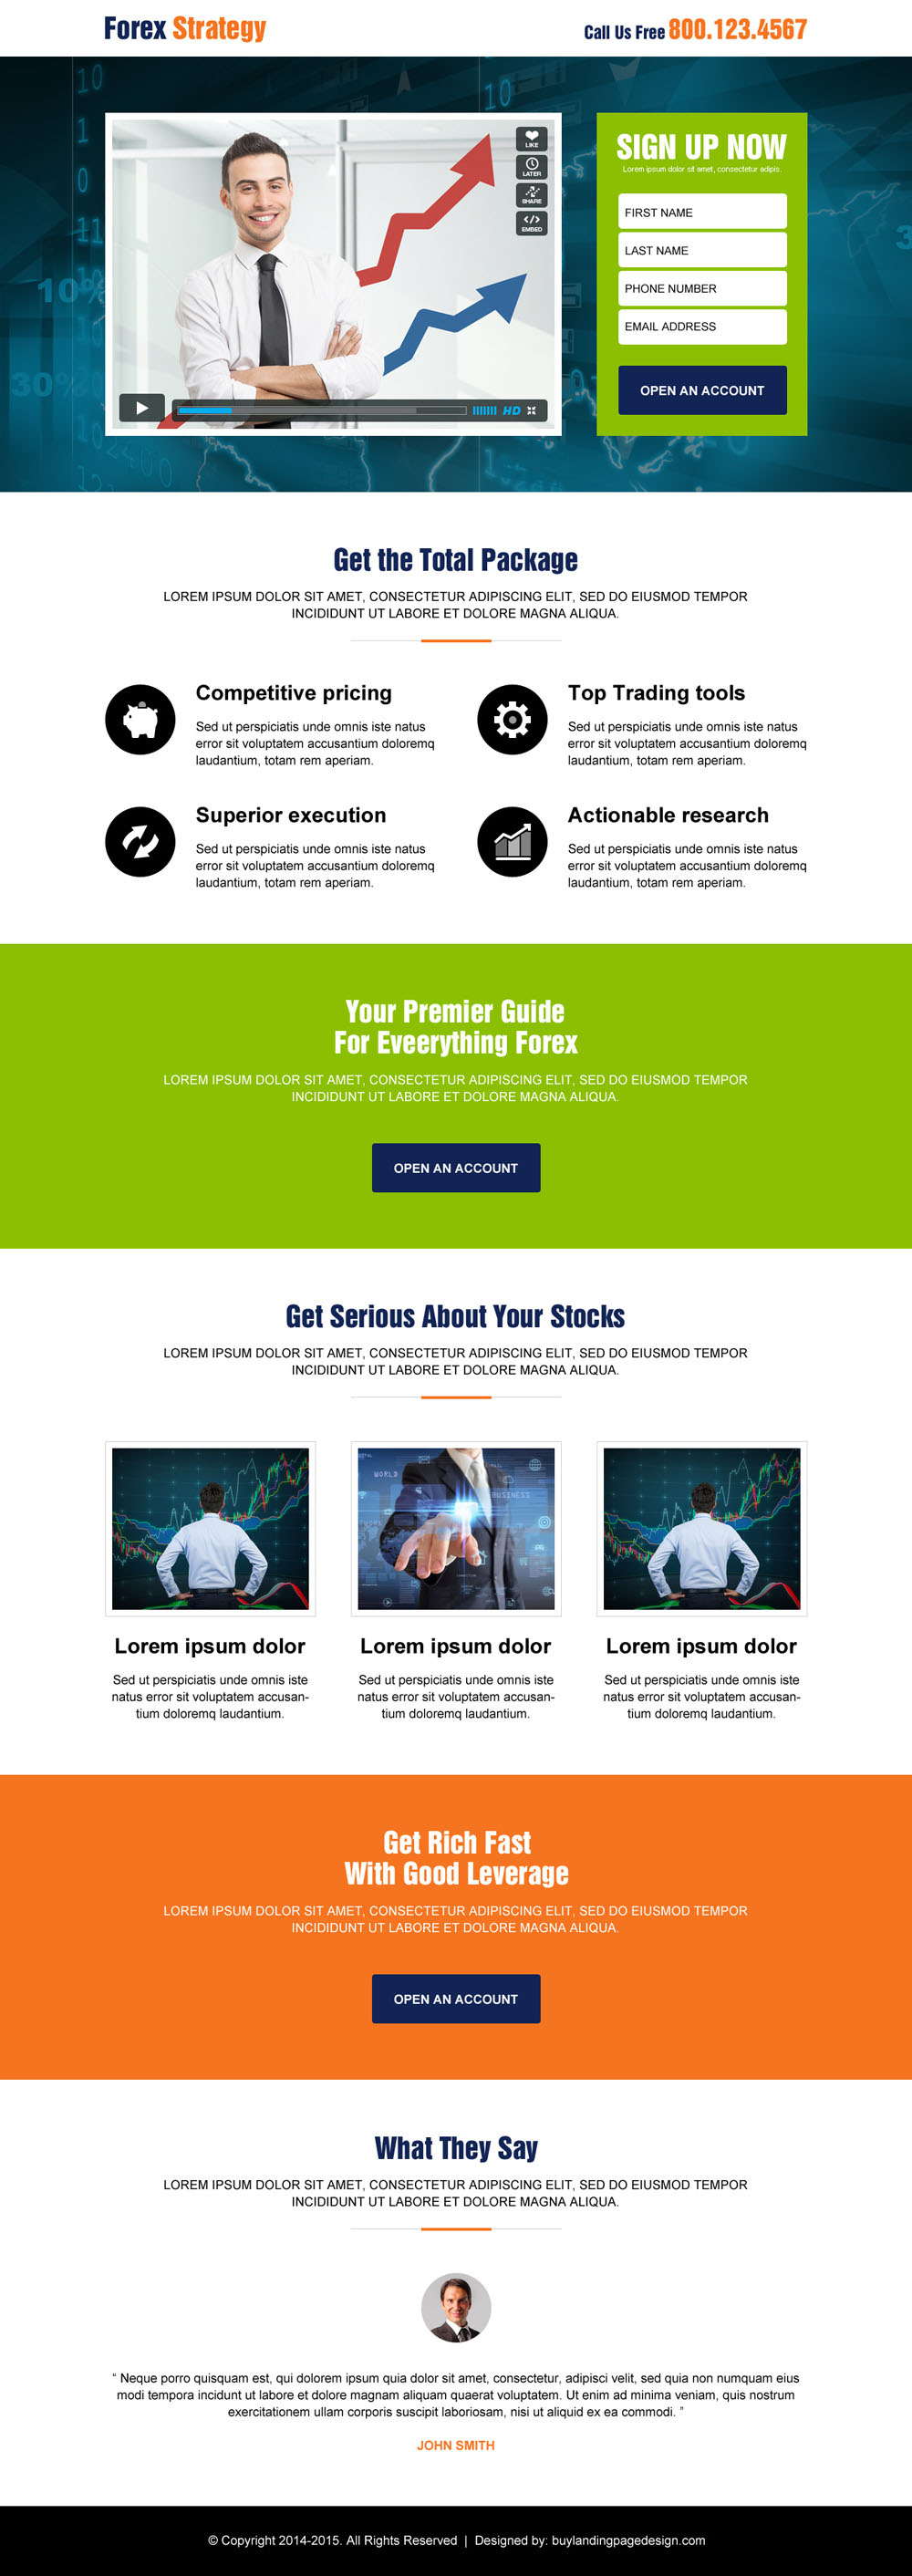 forex-video-sign-up-lead-capture-converting-landing-page-design-template-005